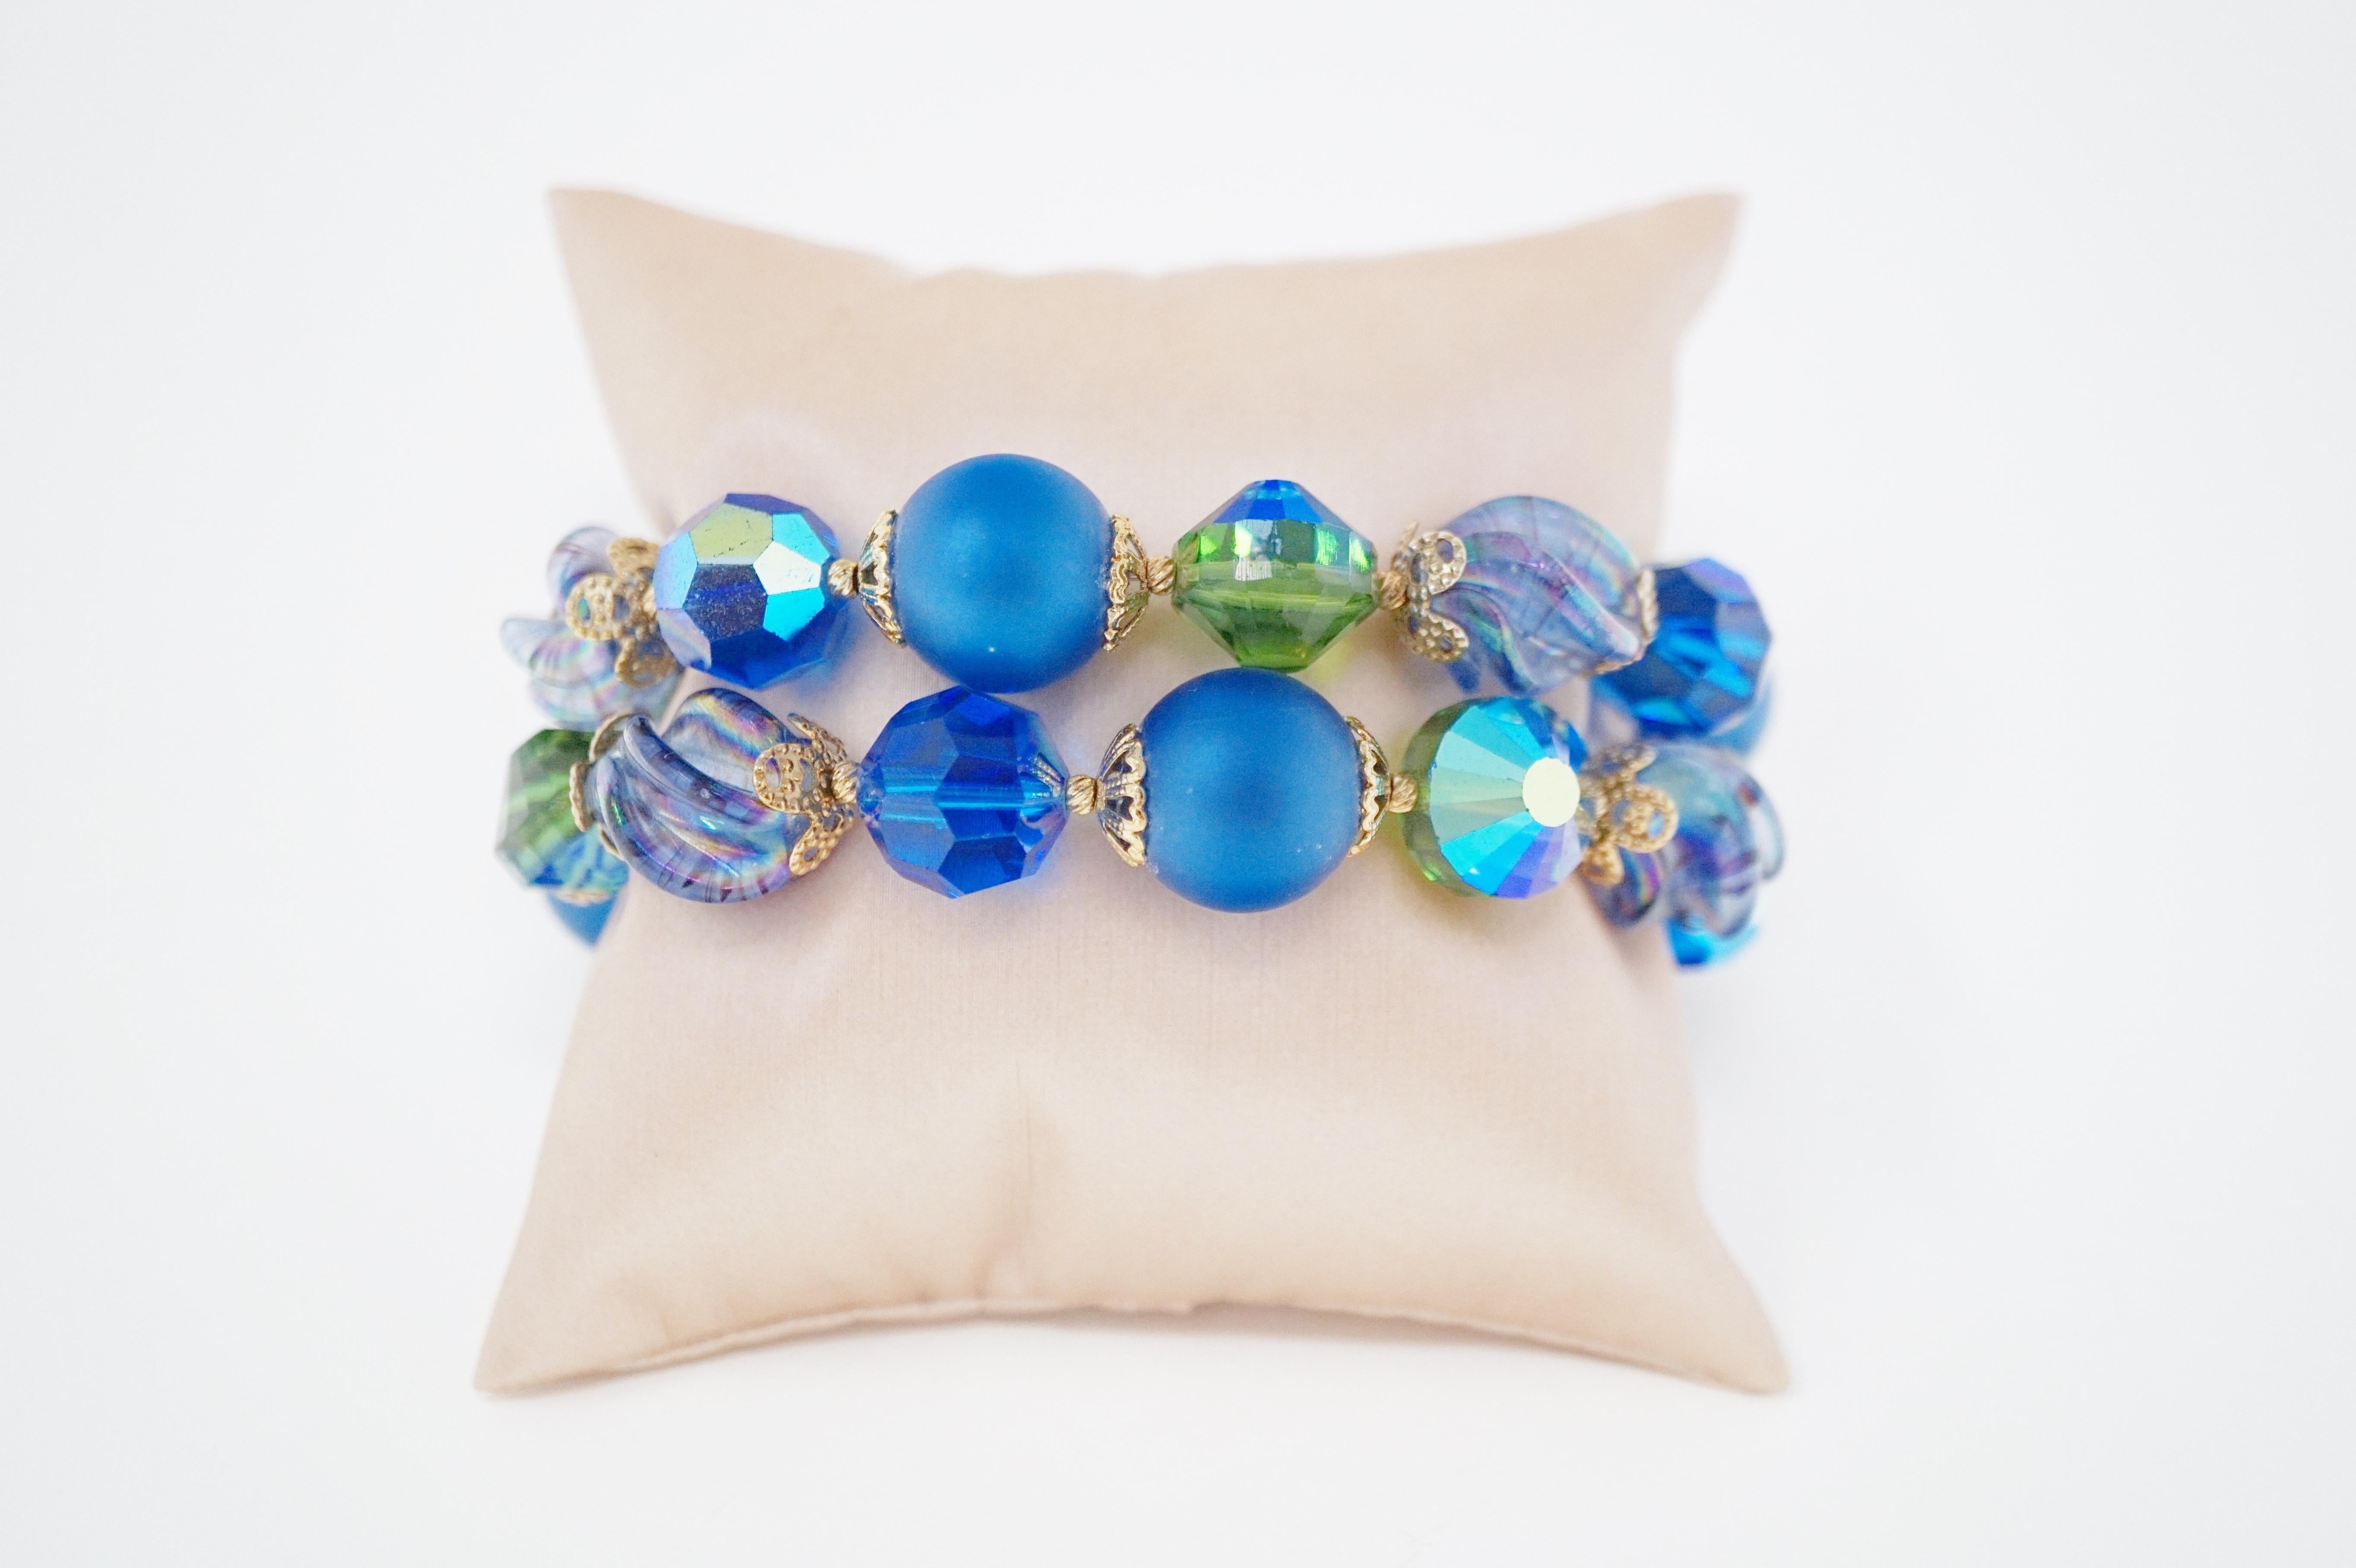 Vendome Beaded Bracelet with Aurora Borealis Crystals, circa 1950, Signed For Sale 2